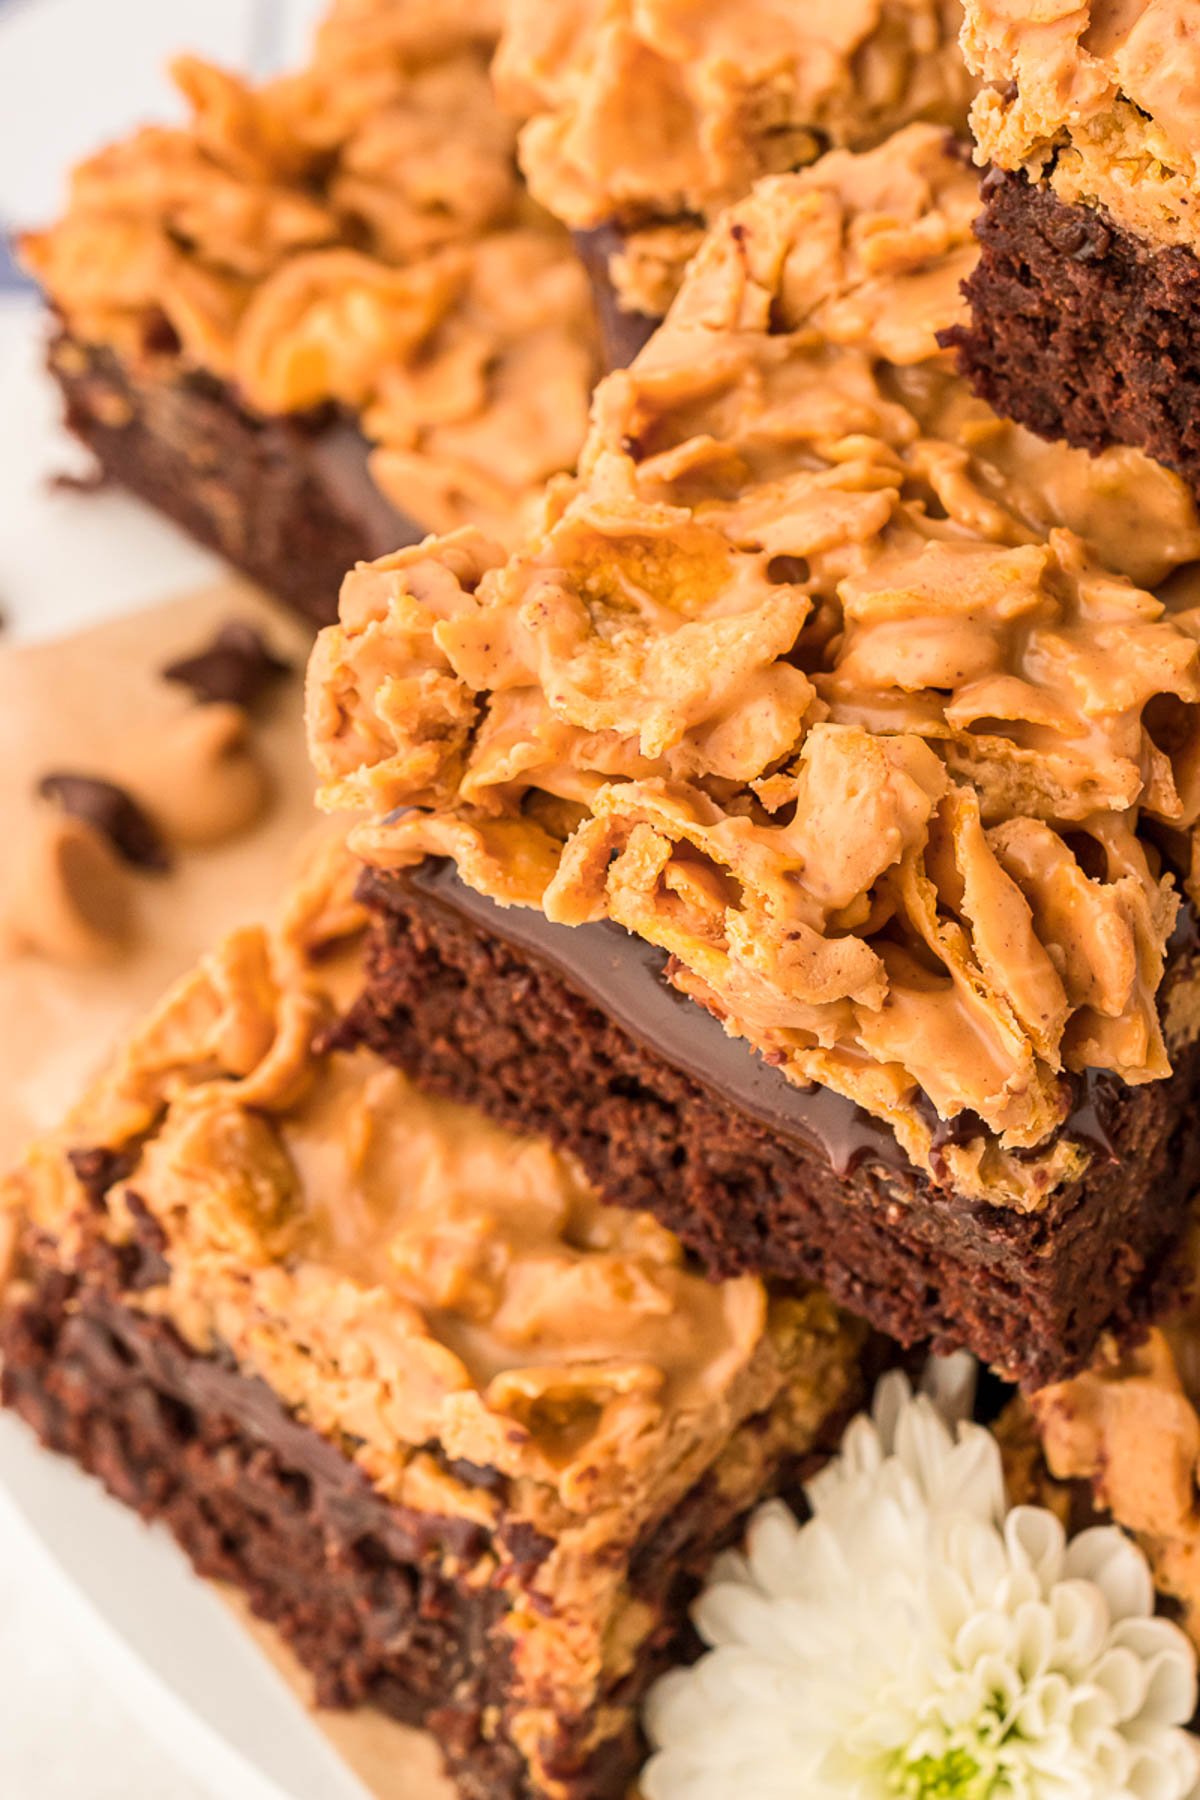 Peanut butter brownies on a plate.